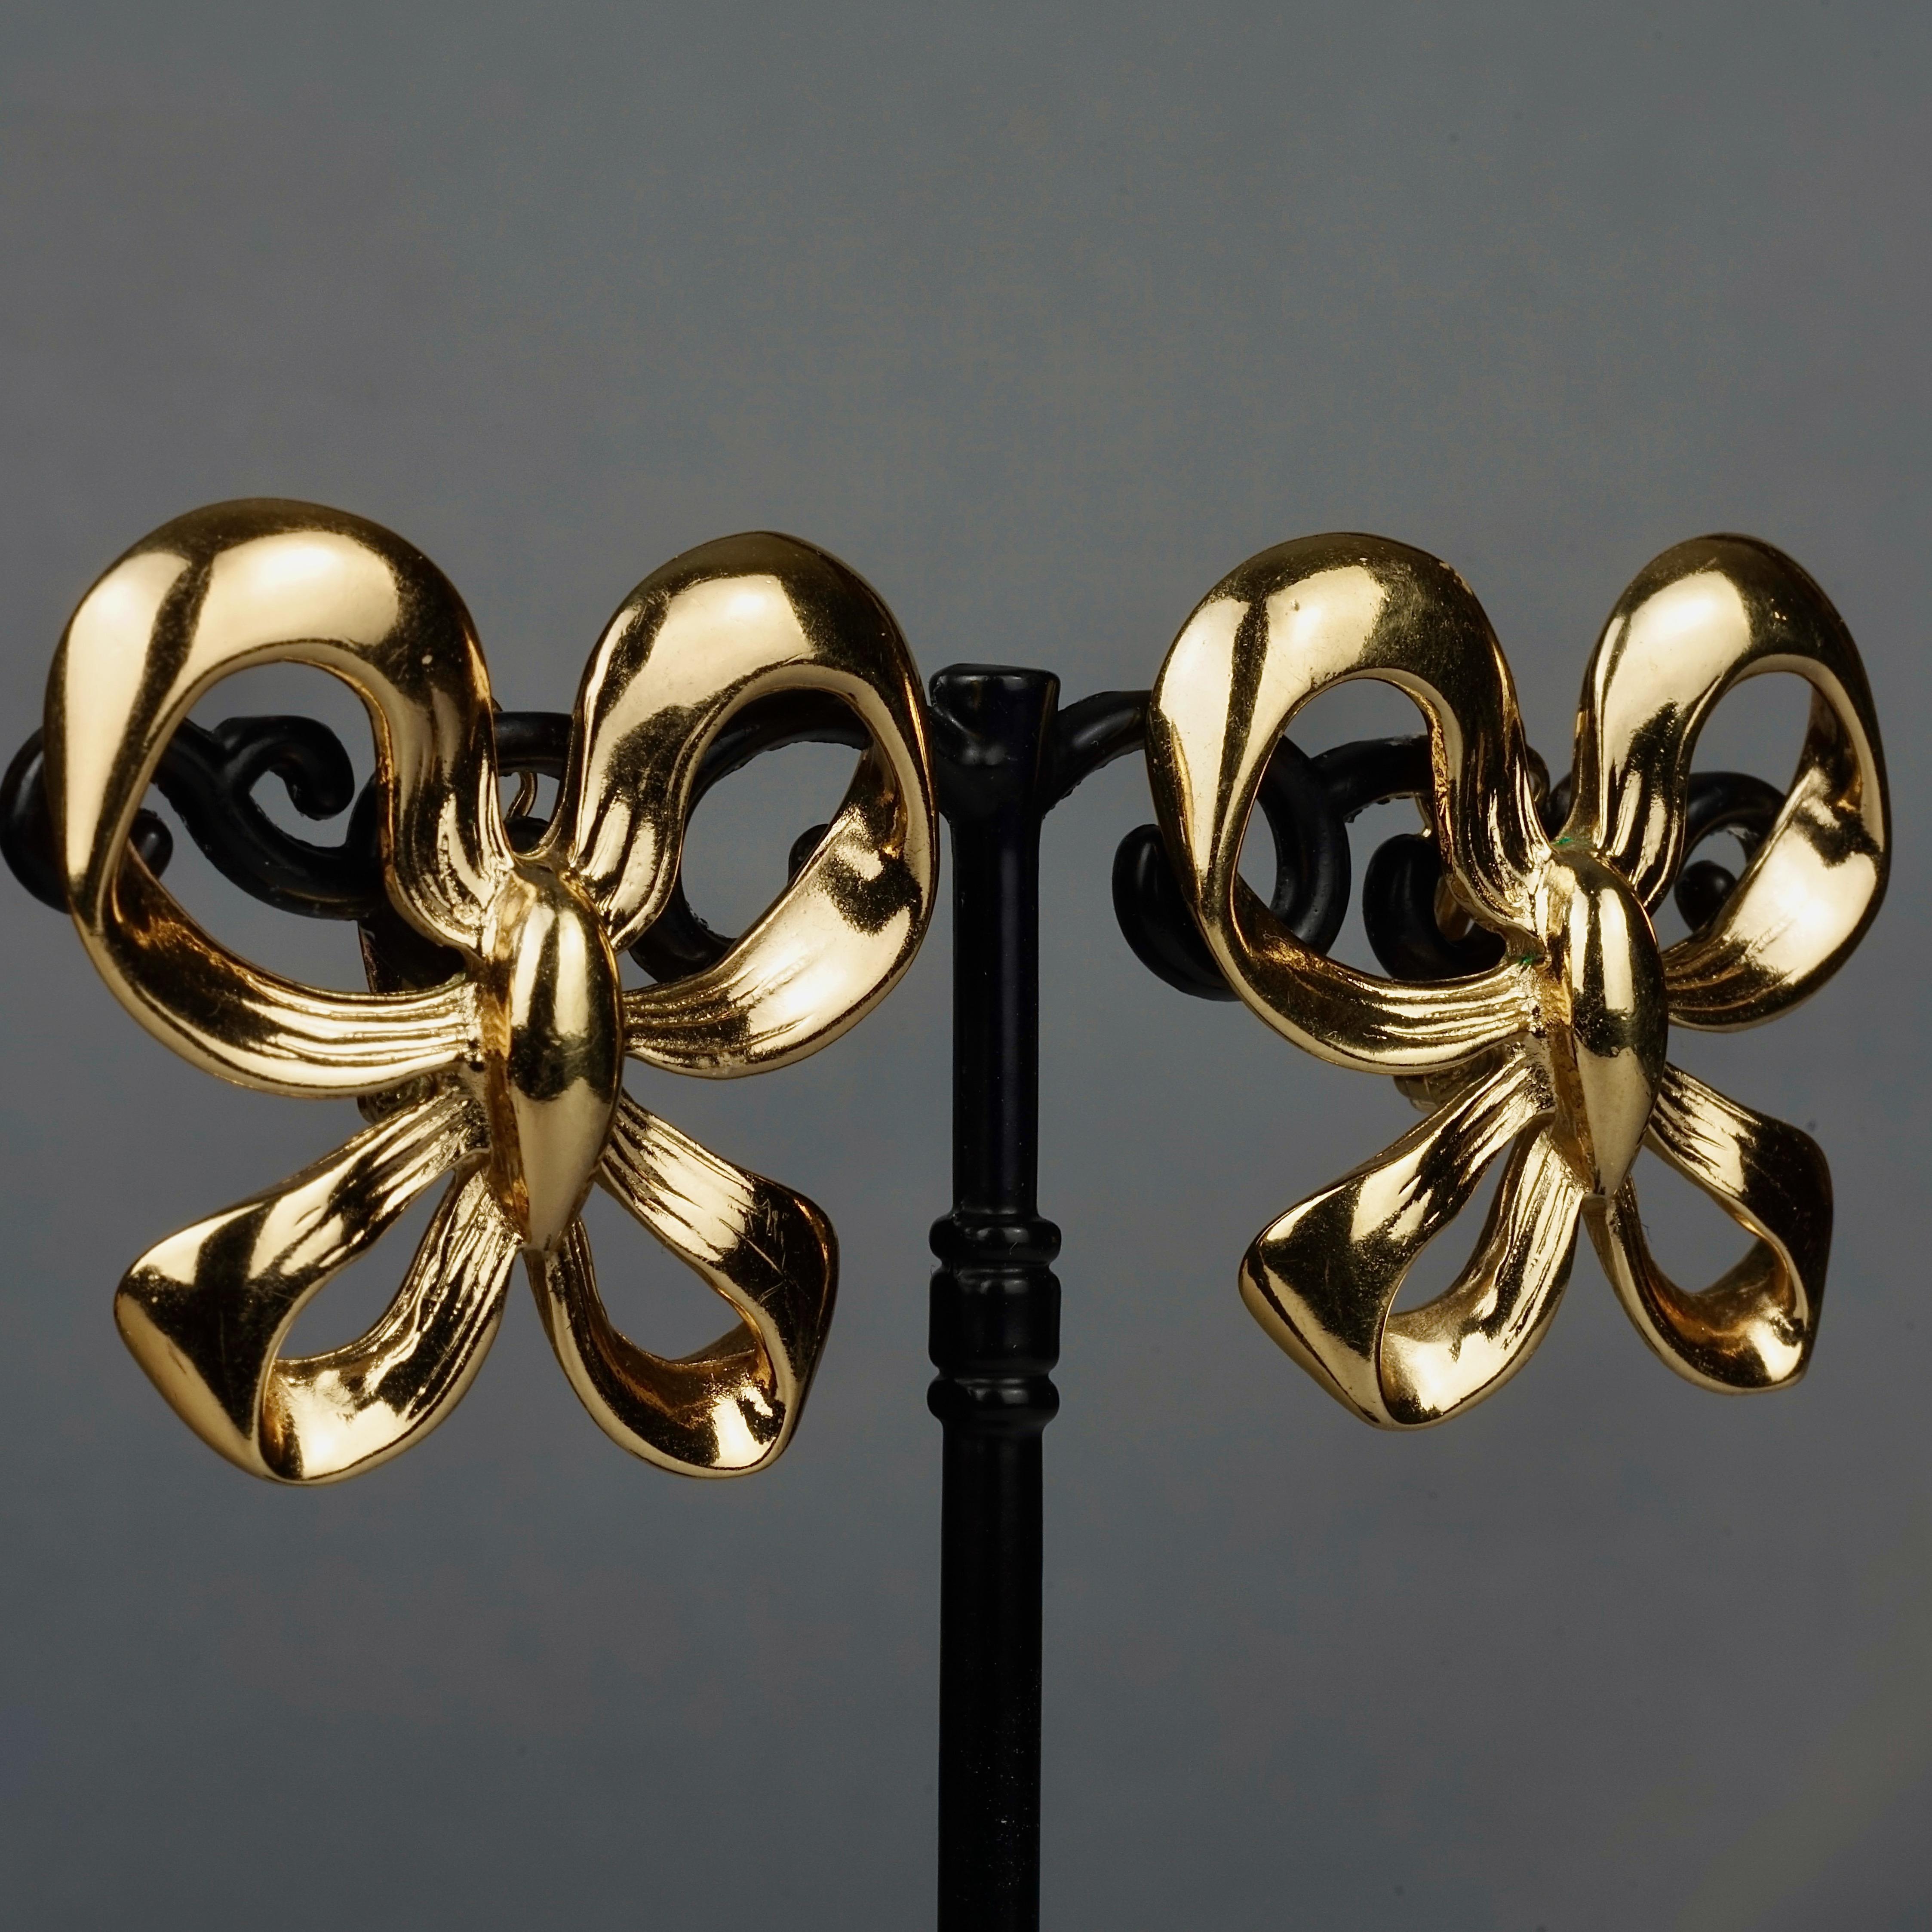 Vintage YVES SAINT LAURENT Ysl Ribbon Bow Earrings In Excellent Condition For Sale In Kingersheim, Alsace